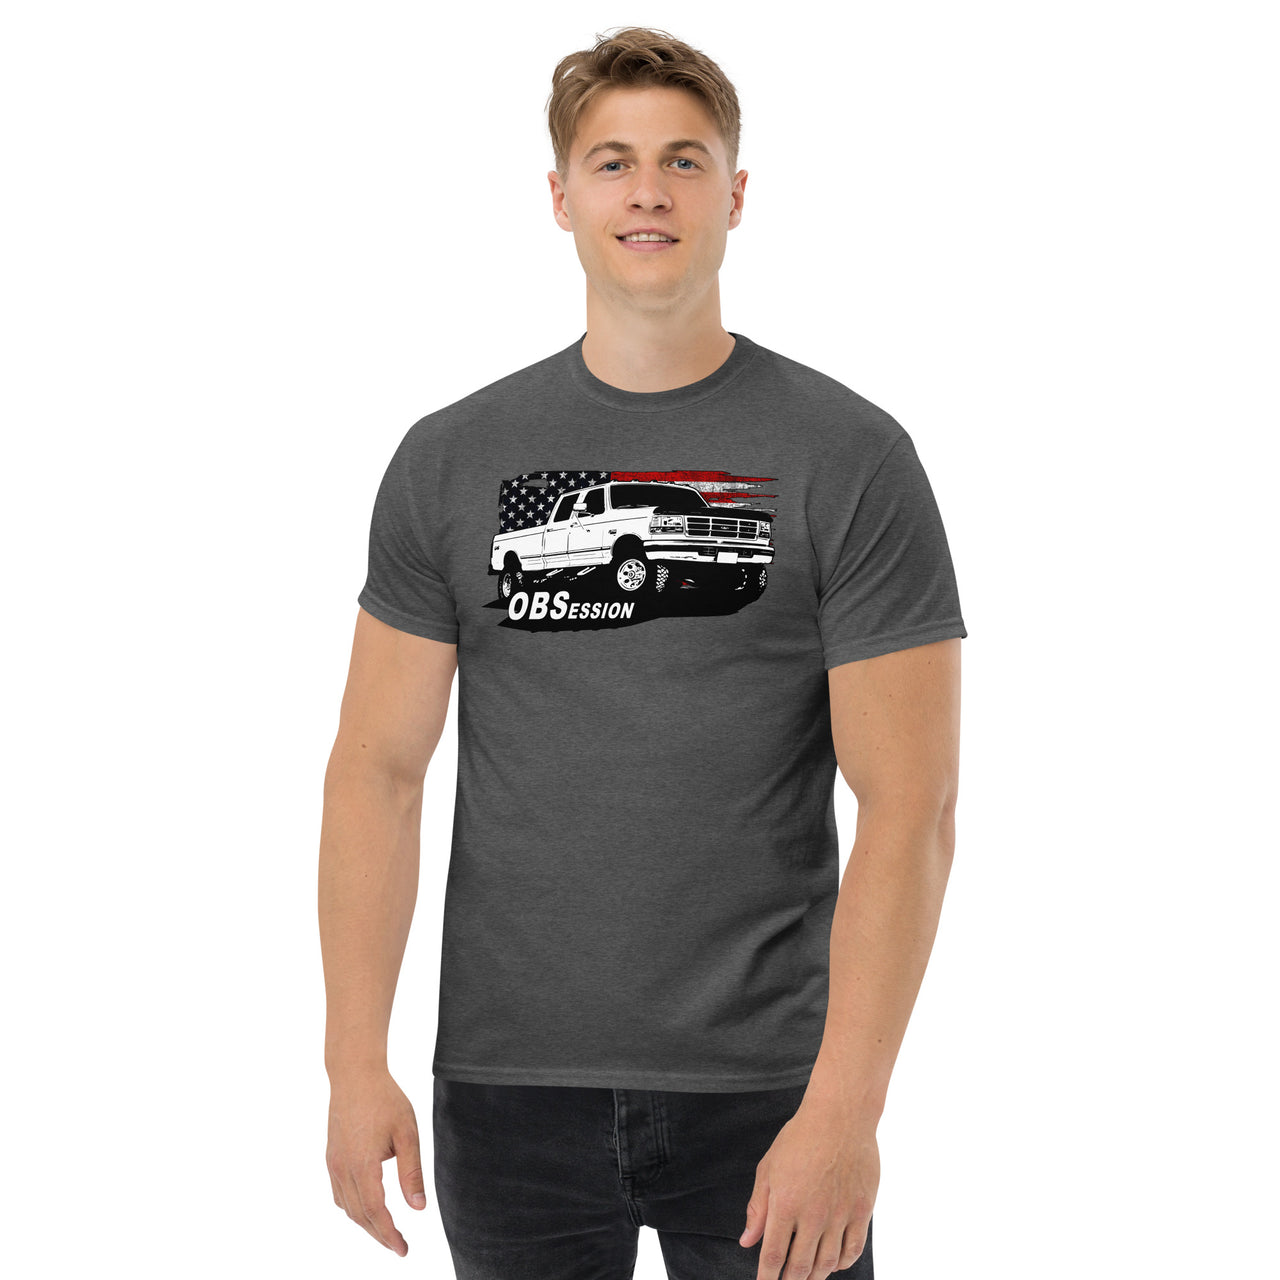 OBS Crew Cab Truck American Flag T-Shirt modeled in grey